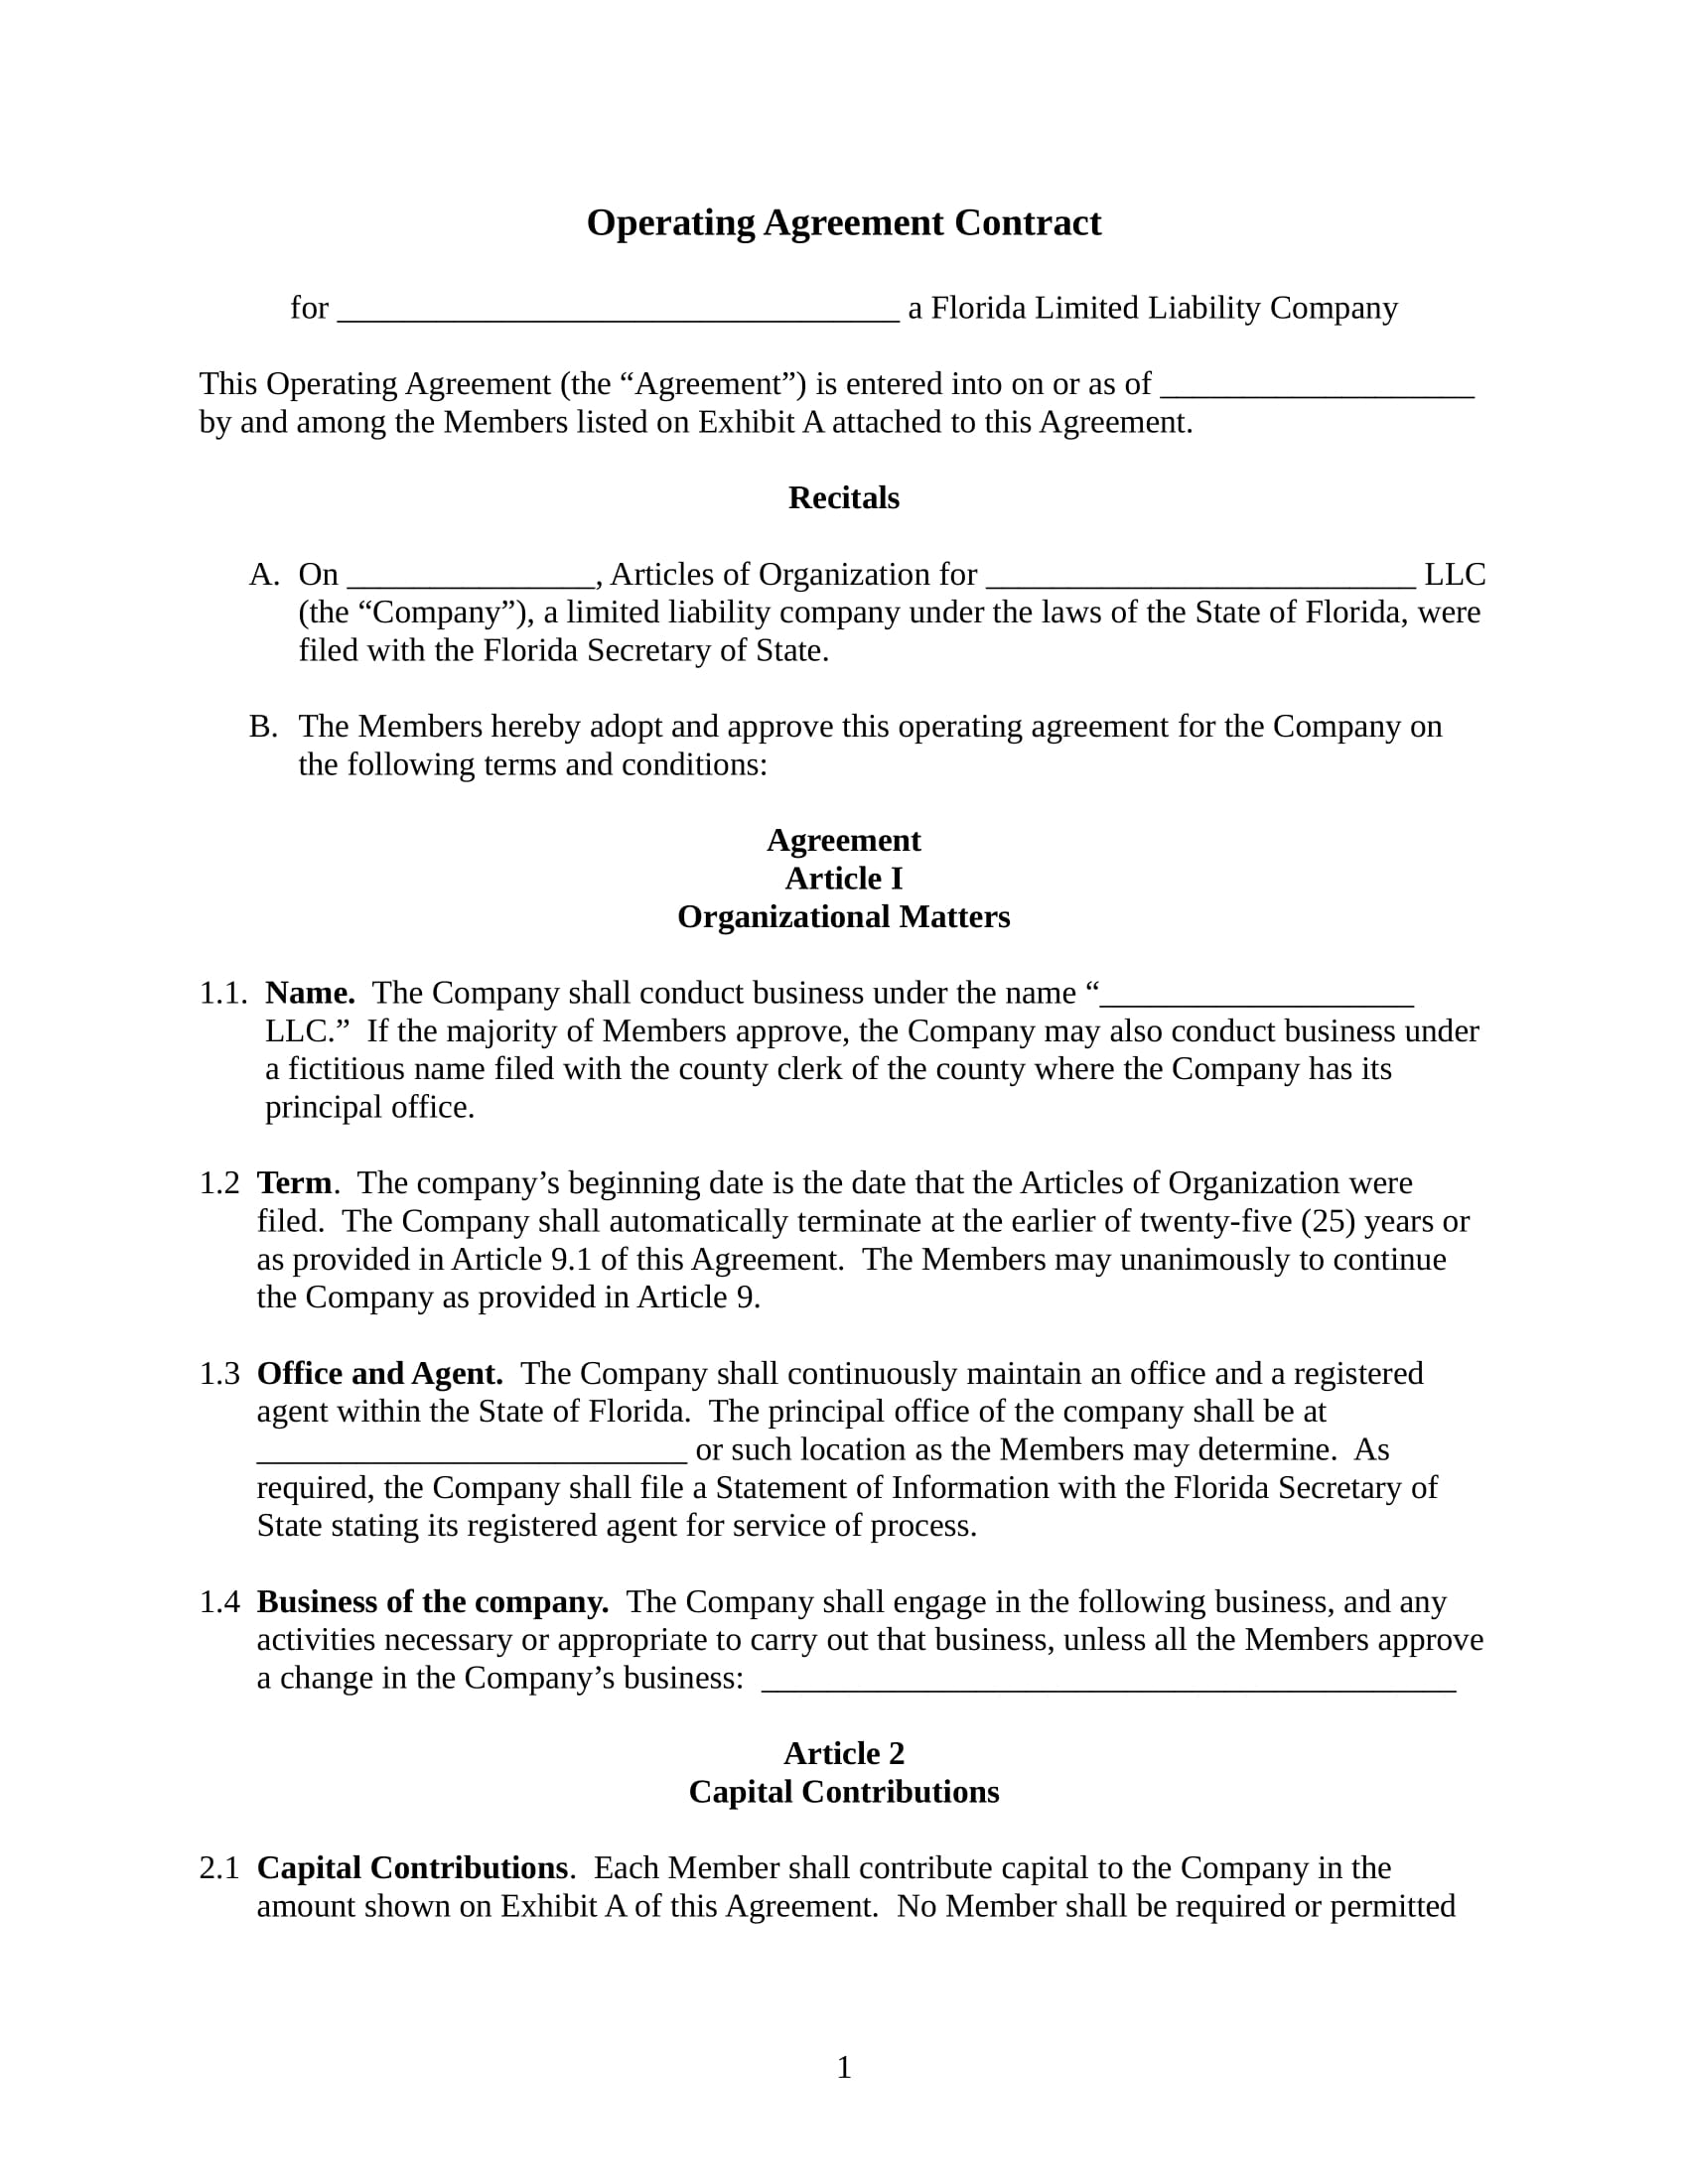 operating agreement contract form in doc 01